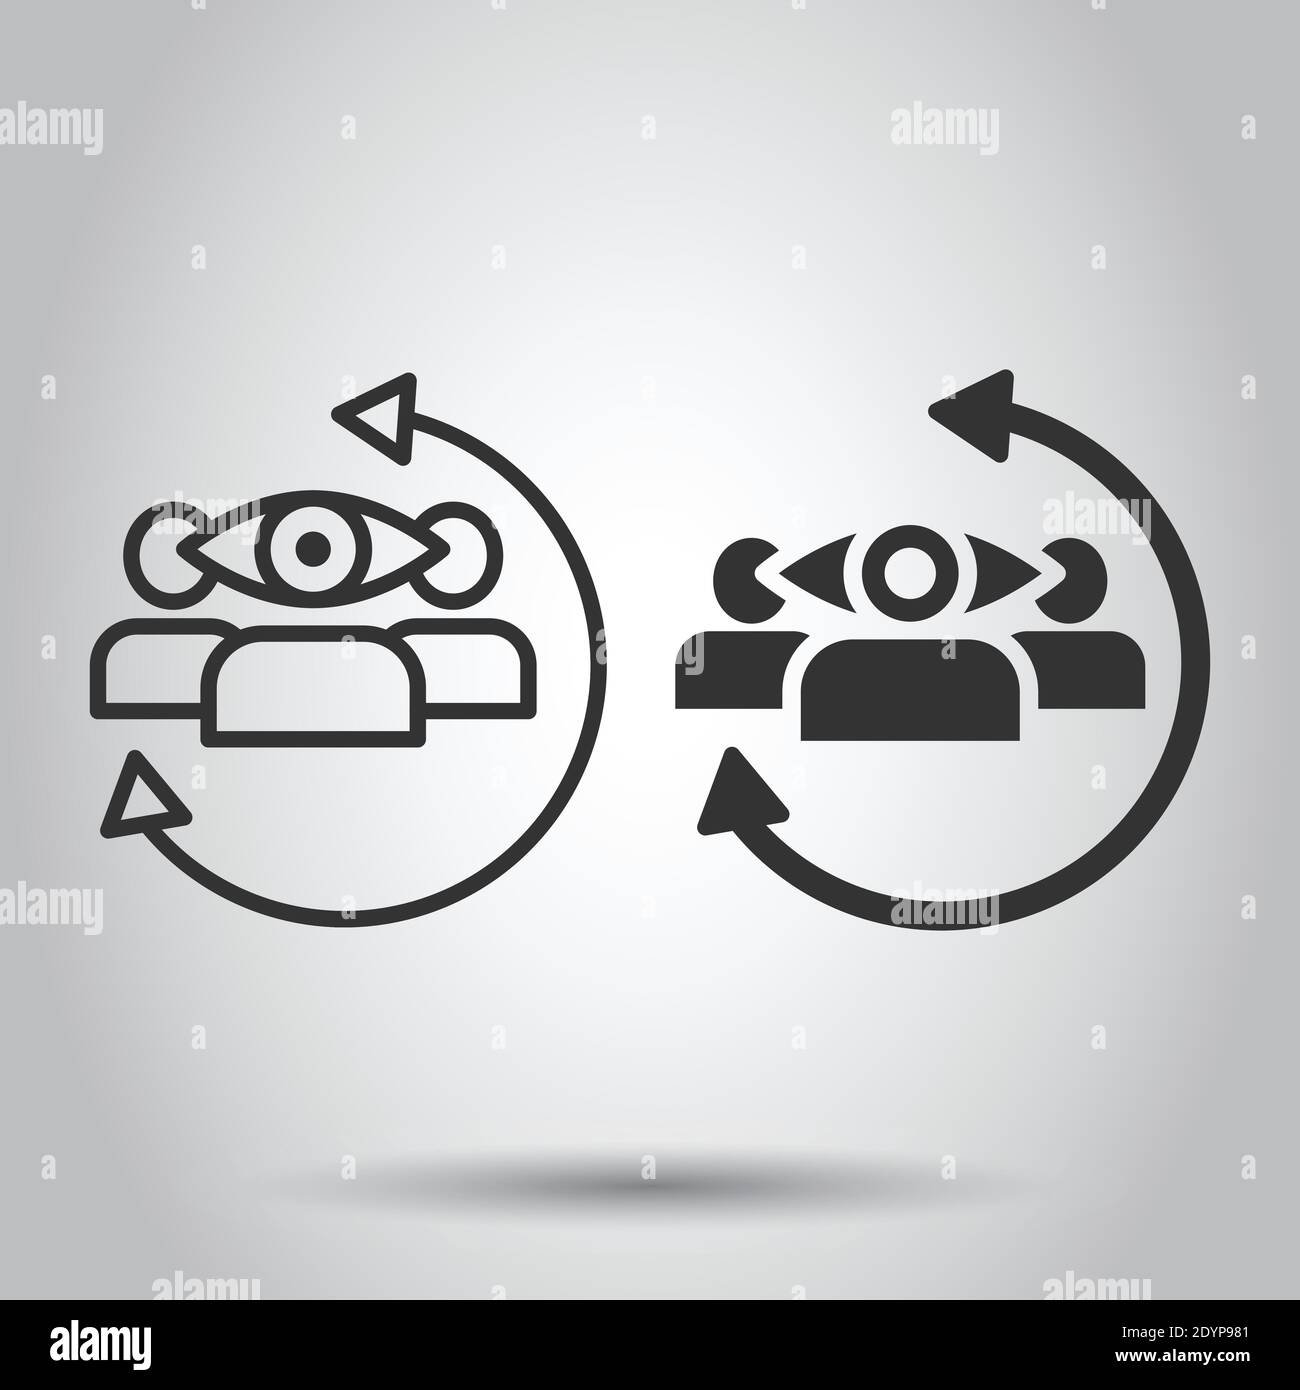 People surveillance icon in flat style. Search human vector illustration on white background. Partnership business concept. Stock Vector